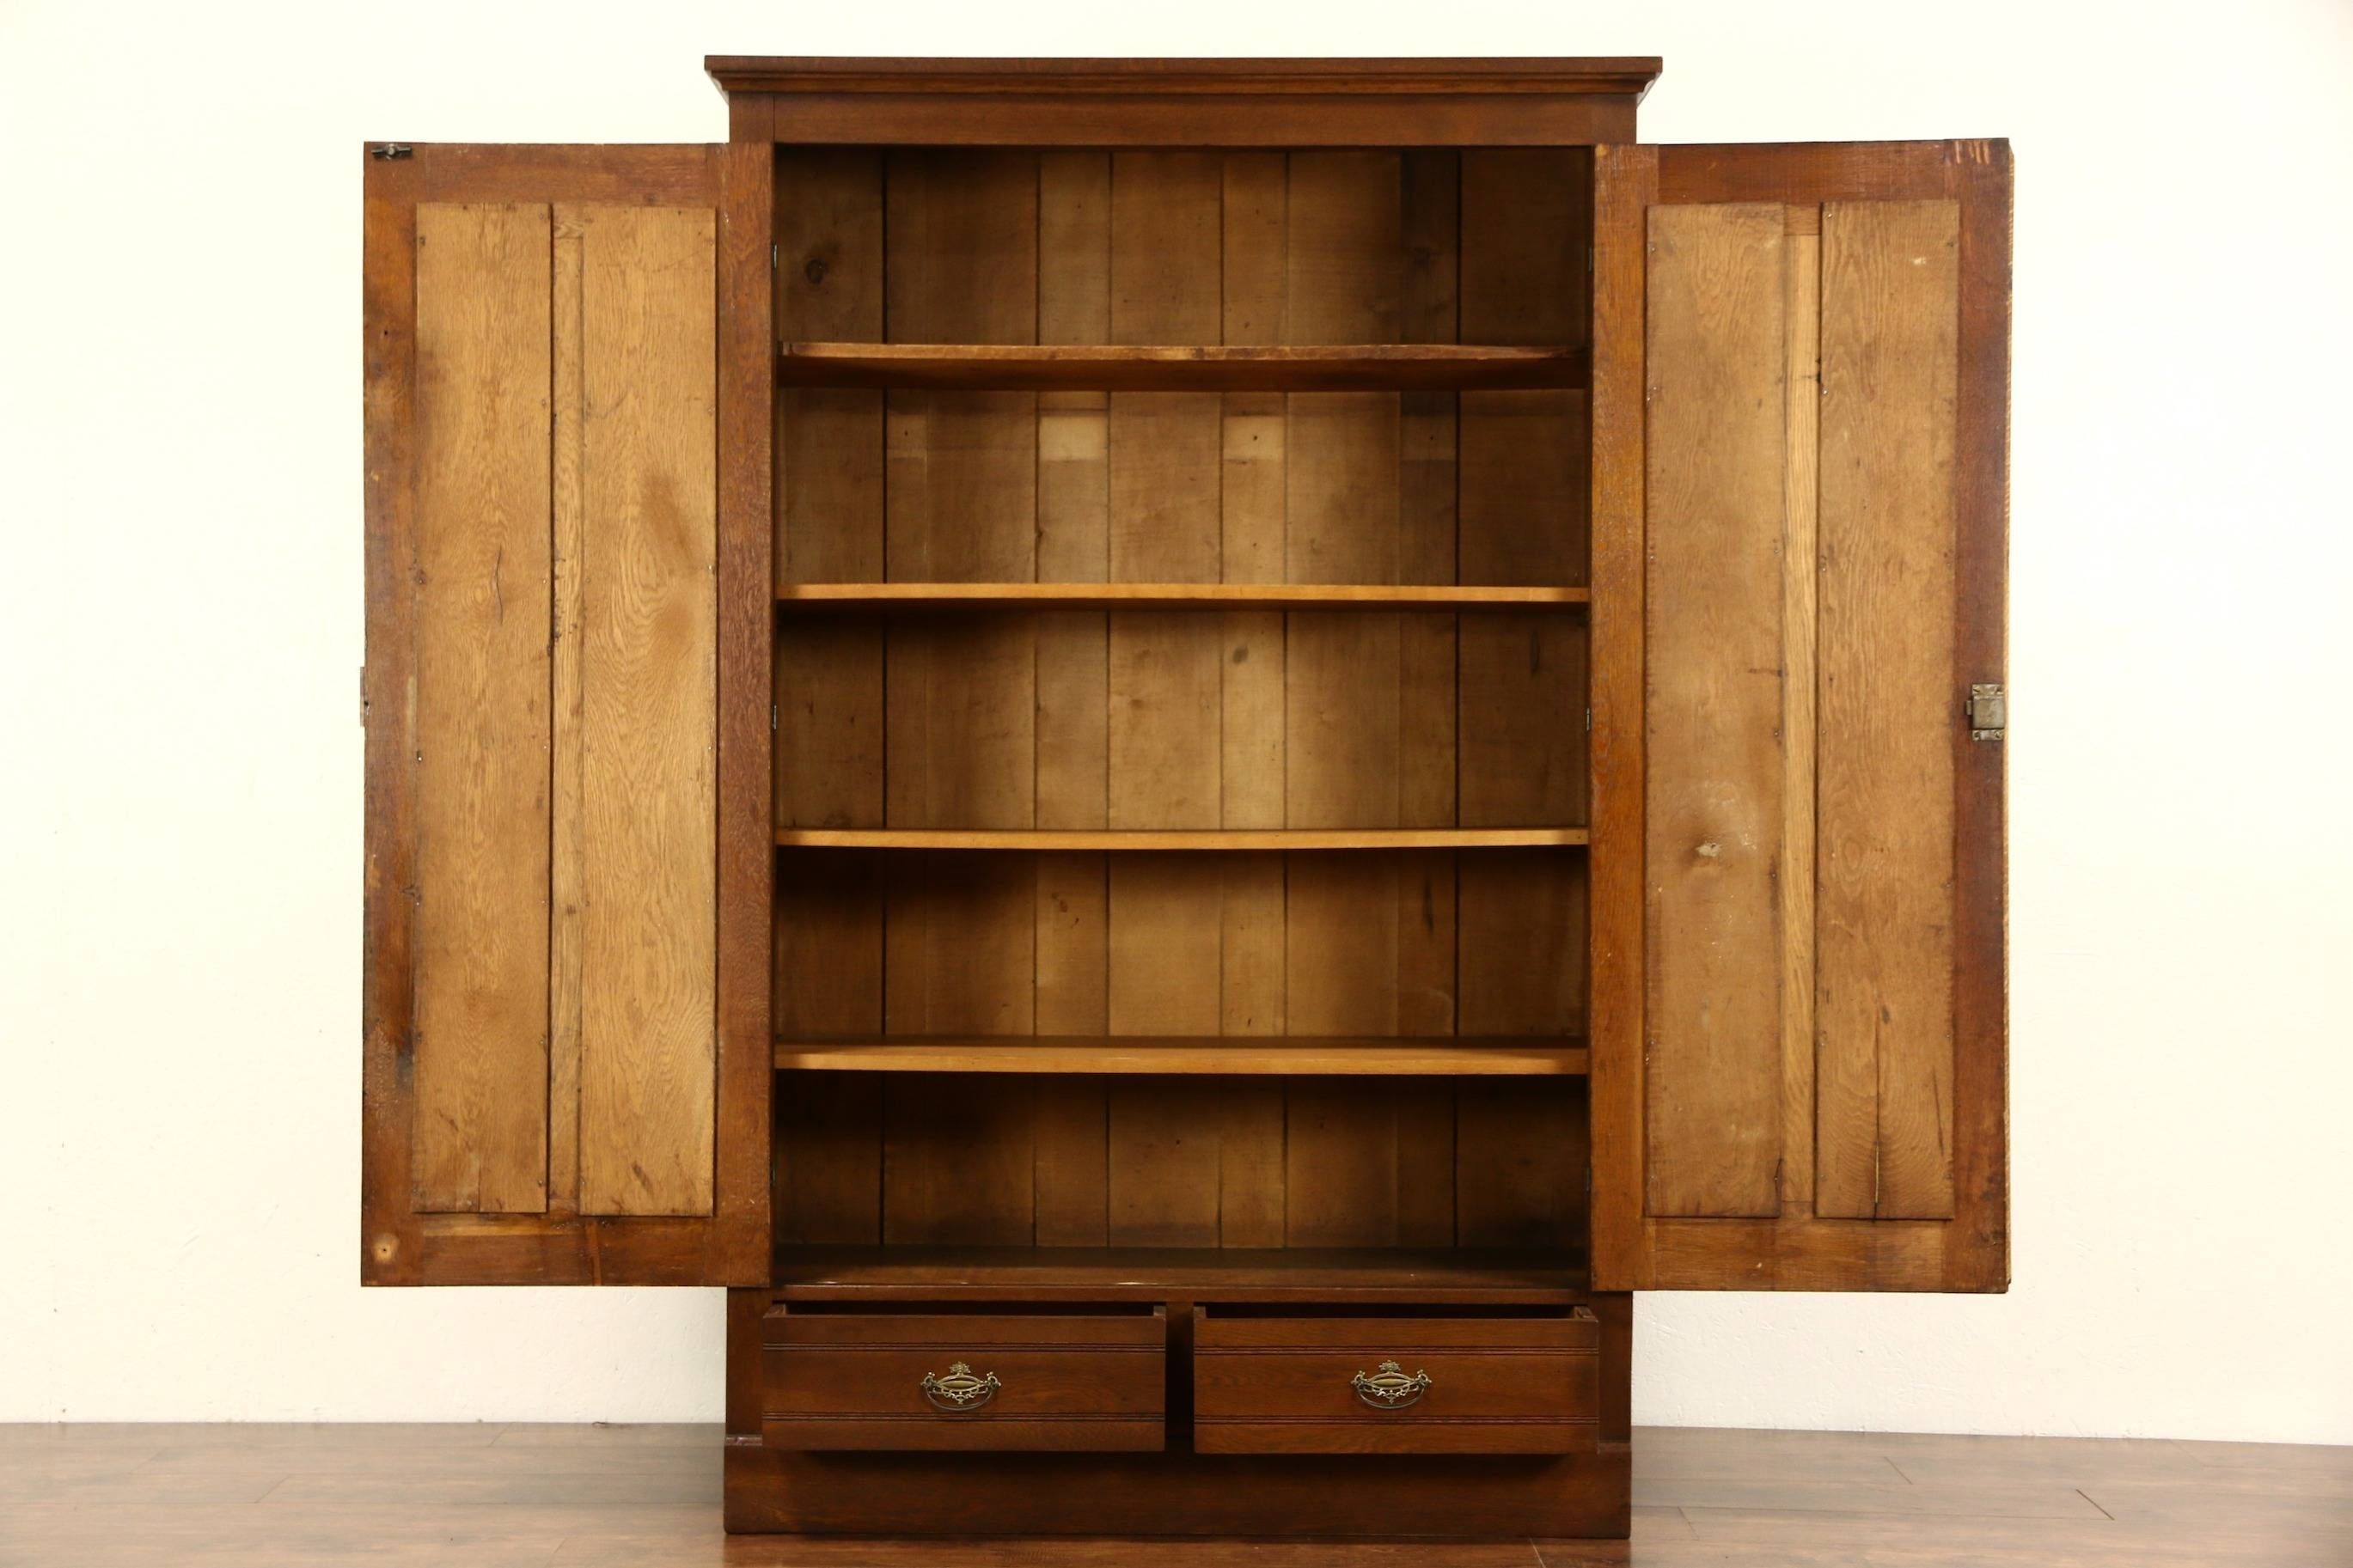 Oak 1885 Antique Armoire, Wardrobe Or Closet, Arched Panel Doors Intended For 2 Door Wardrobe With Drawers And Shelves (View 26 of 30)